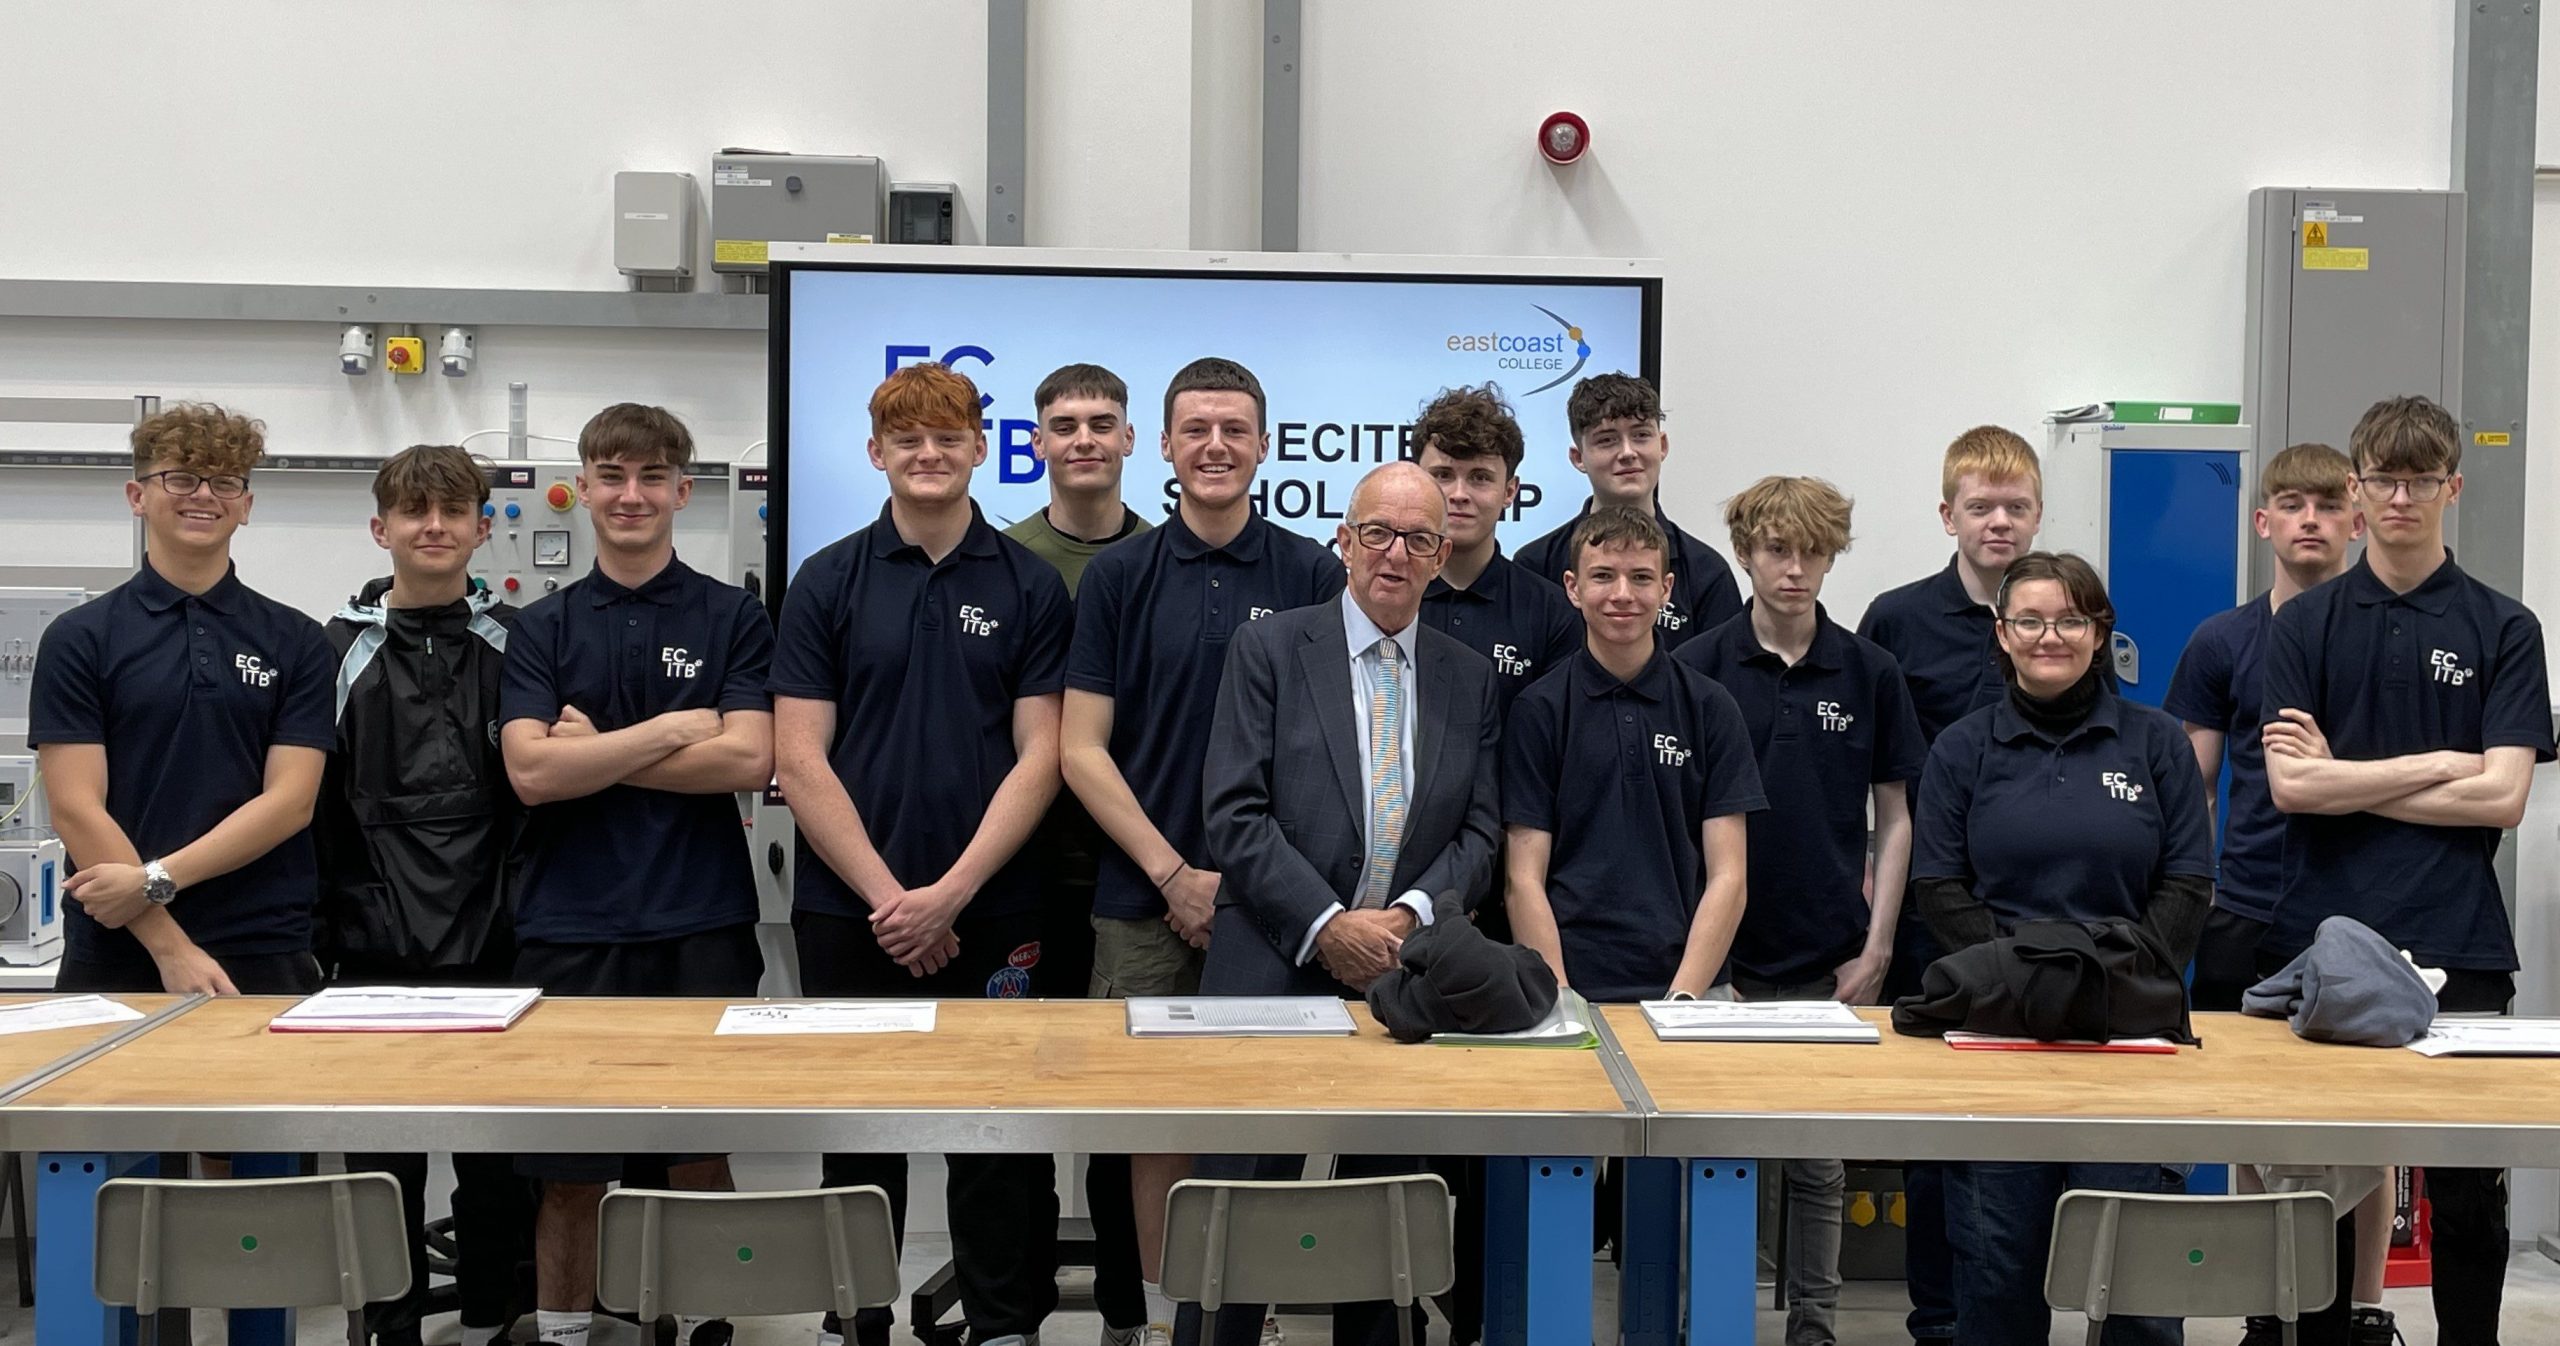 ECITB Chief Executive Andrew Hockey With Scholars At East Coast College Scaled Aspect Ratio 760 400